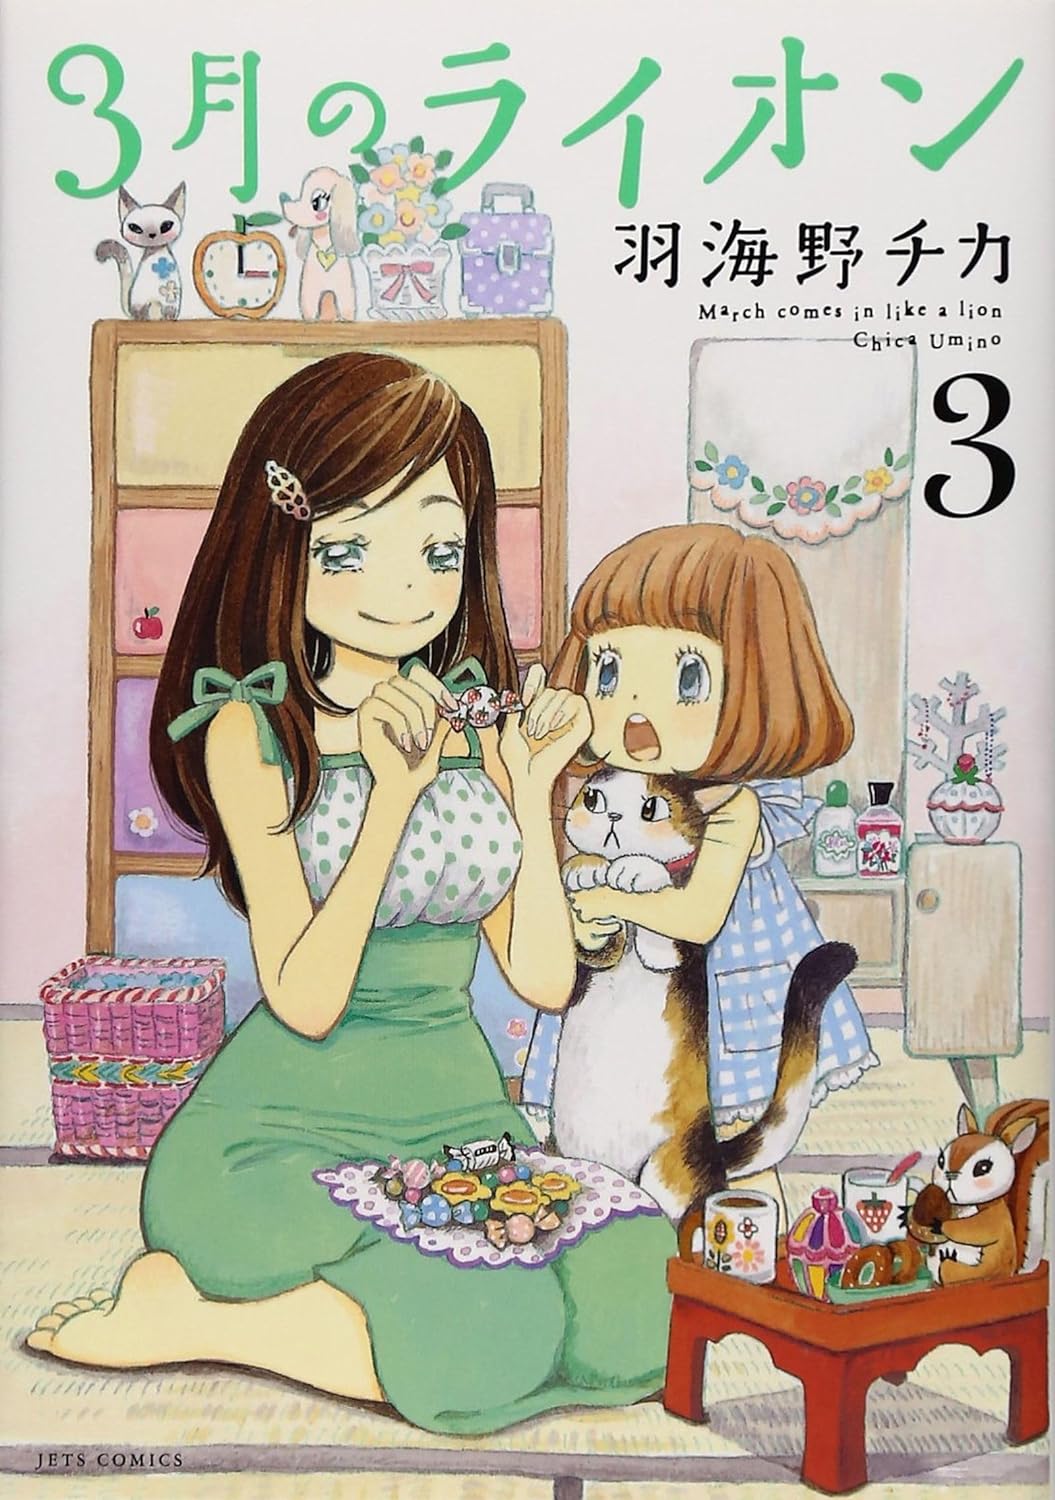 March Comes in Like a Lion Manga Volume 3